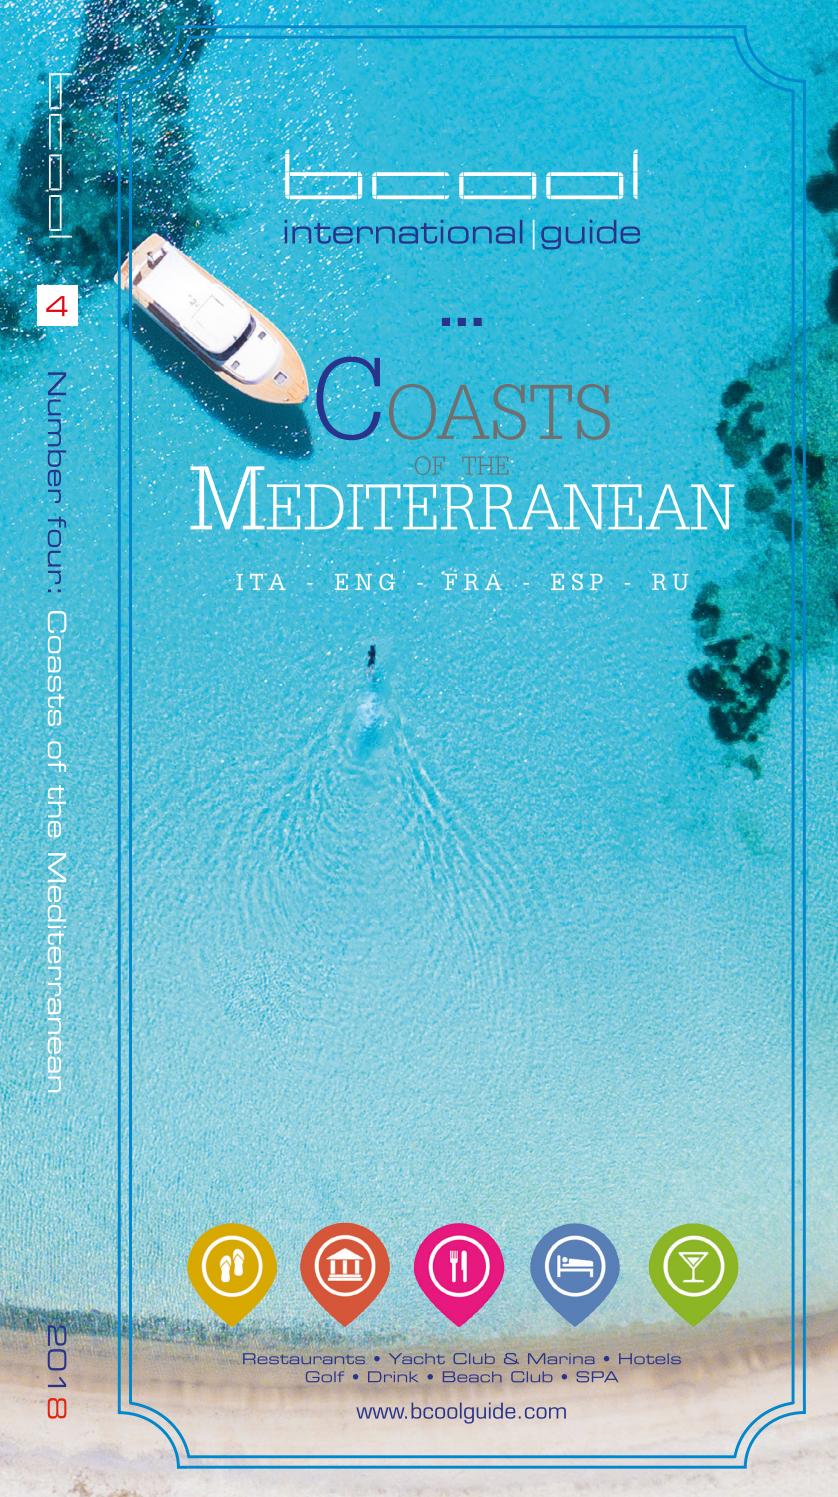 Table Mange Debout Exterieur Nouveau 2018 Bcool Guide "coasts Of the Mediterrean" by Bcool City